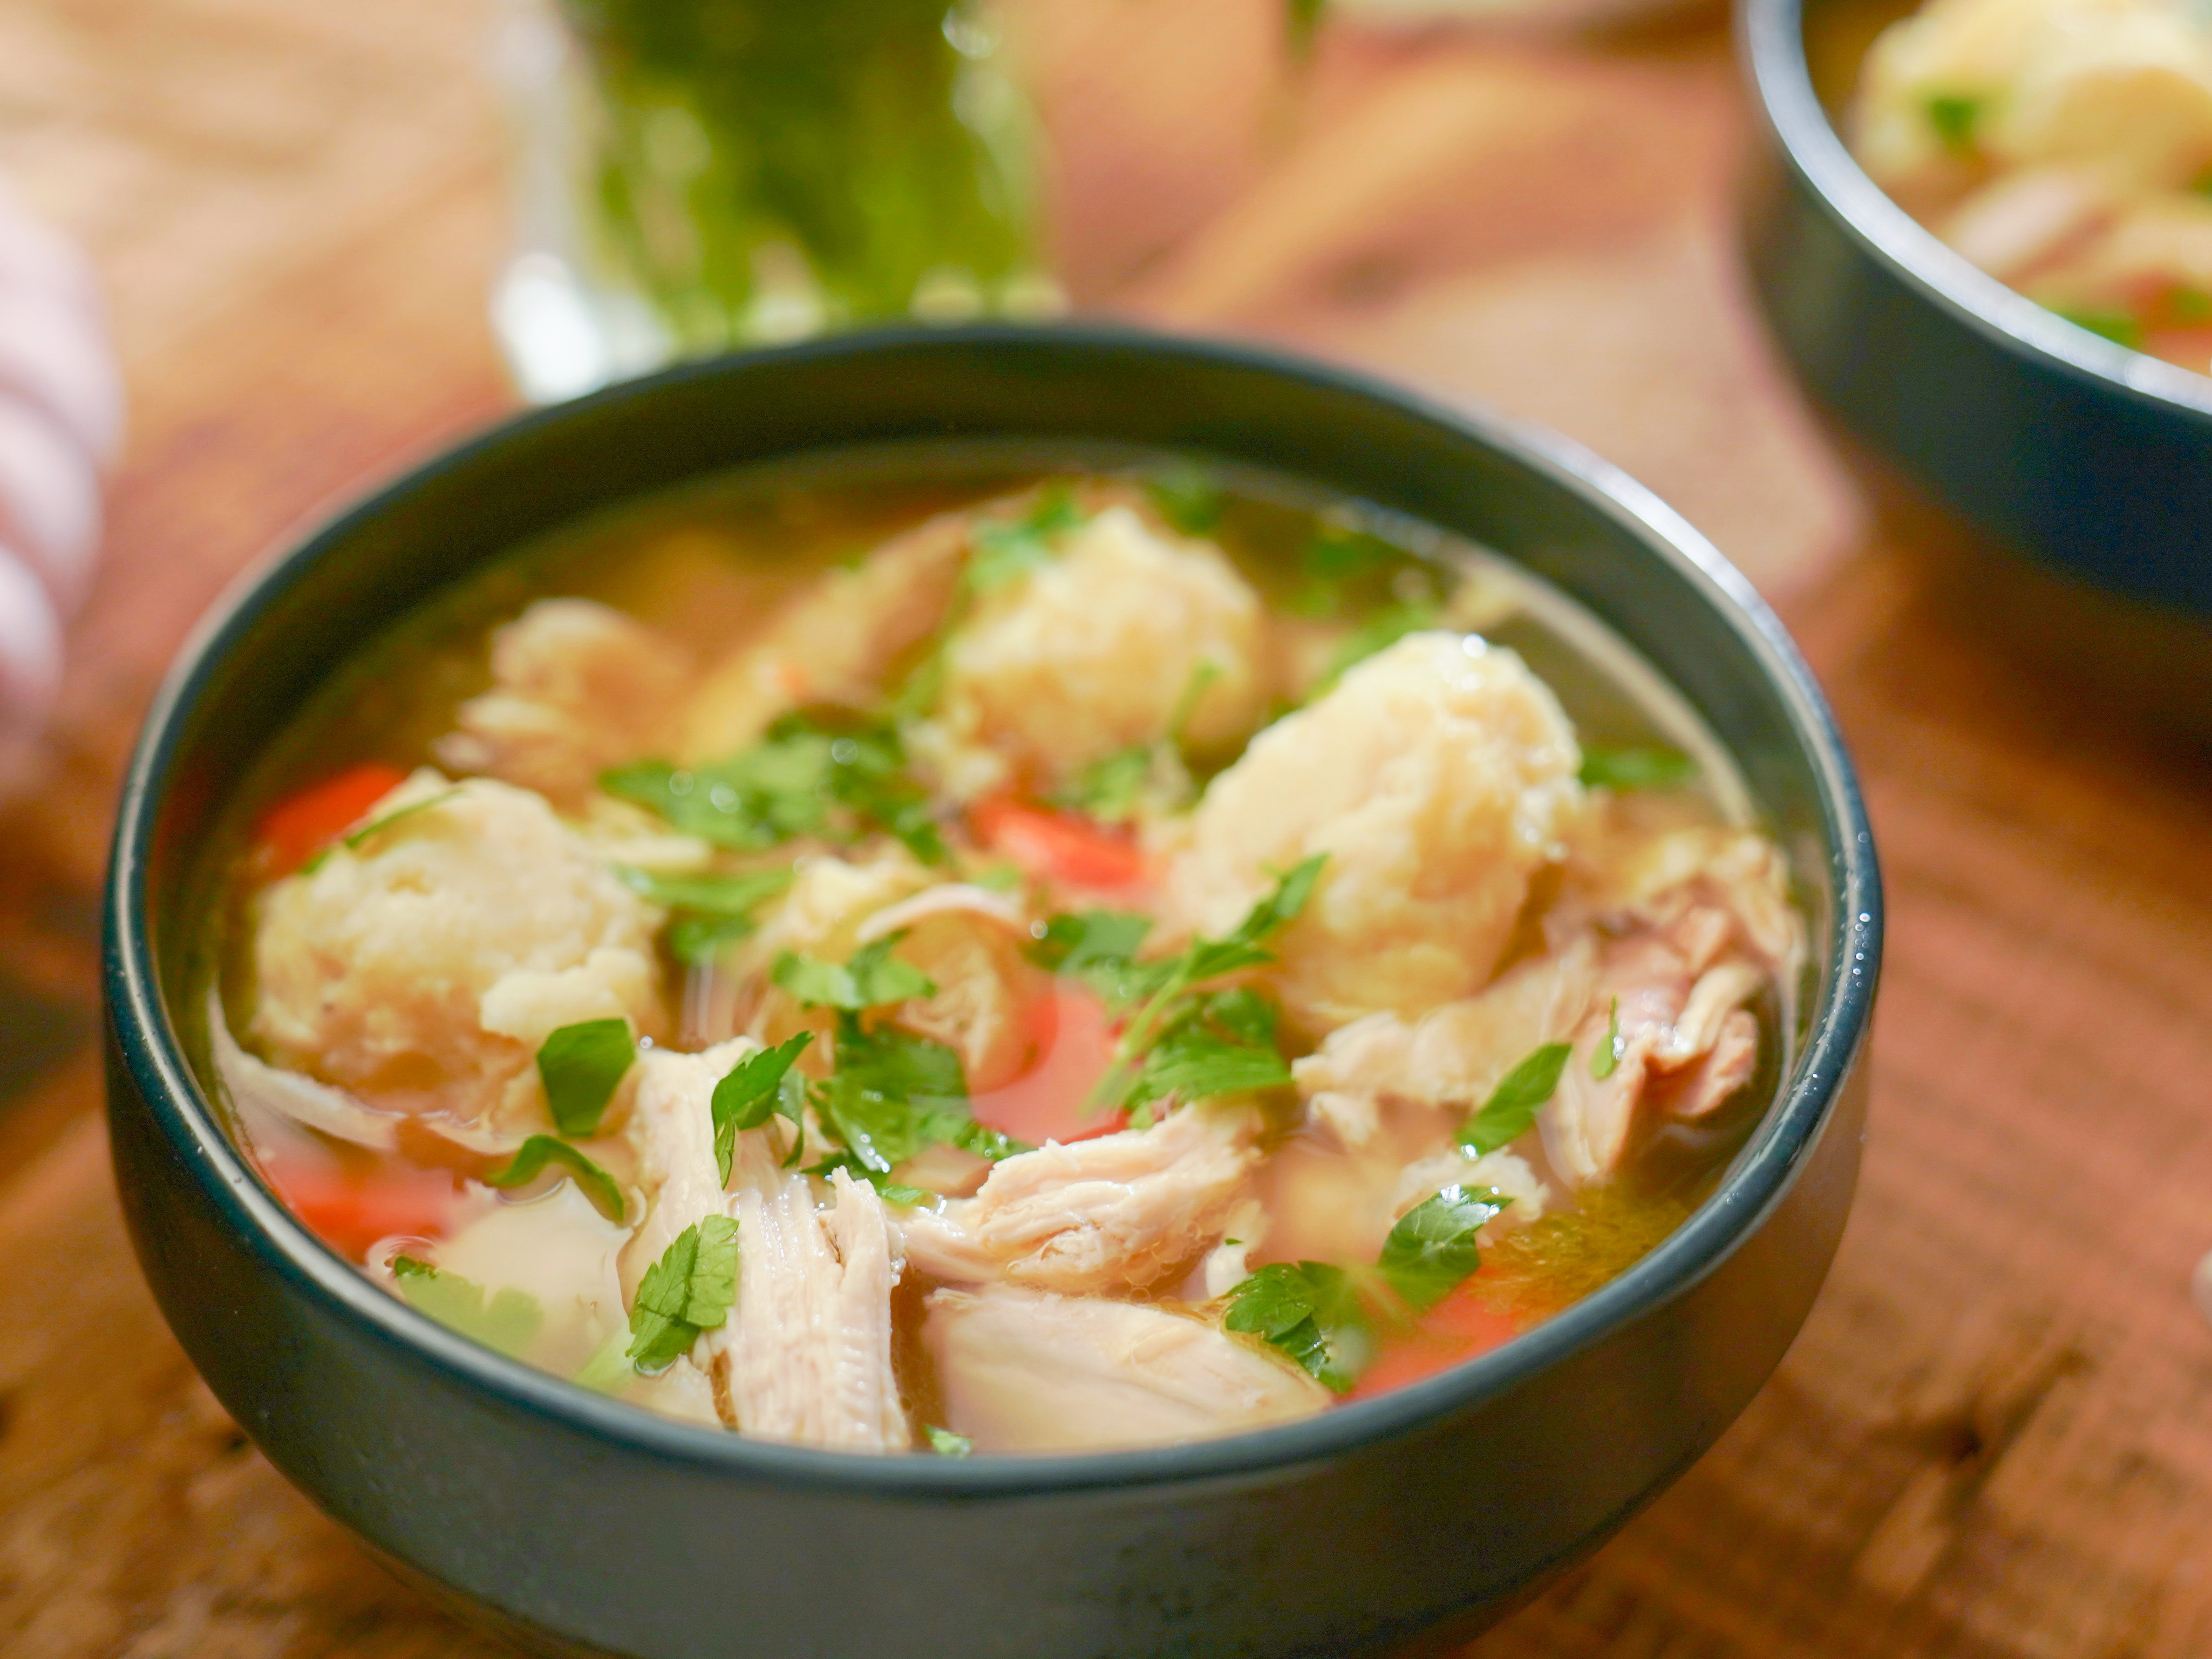 https://www.foodnetwork.com/content/dam/images/food/fullset/30/0/MW1003_molly-yeh-chicken-and-dumpling-soup_s4x3.jpg